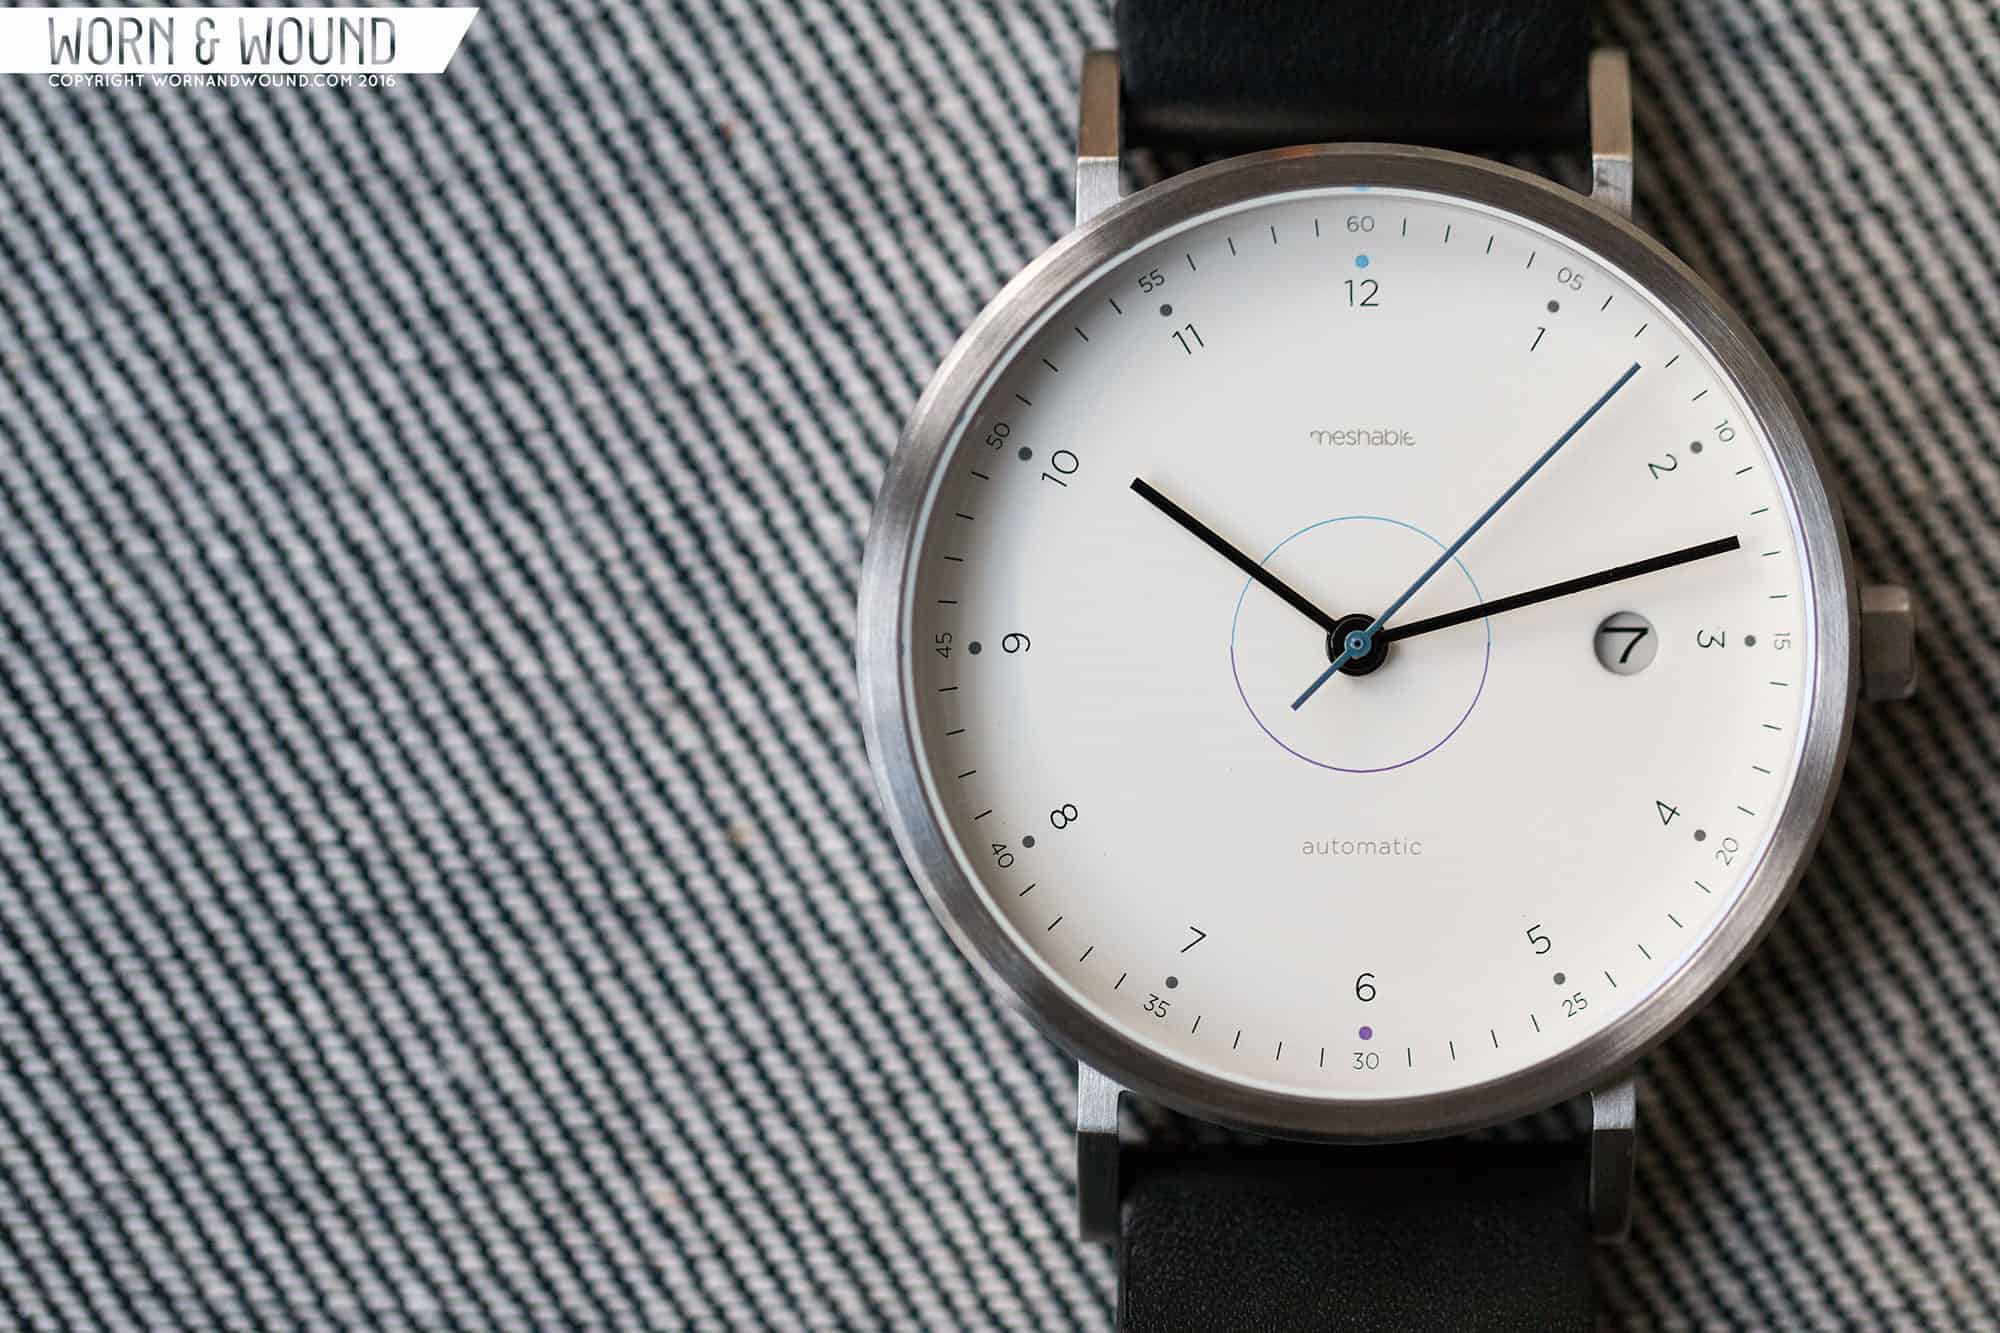 Hands-On with the Meshable 003 - Worn & Wound